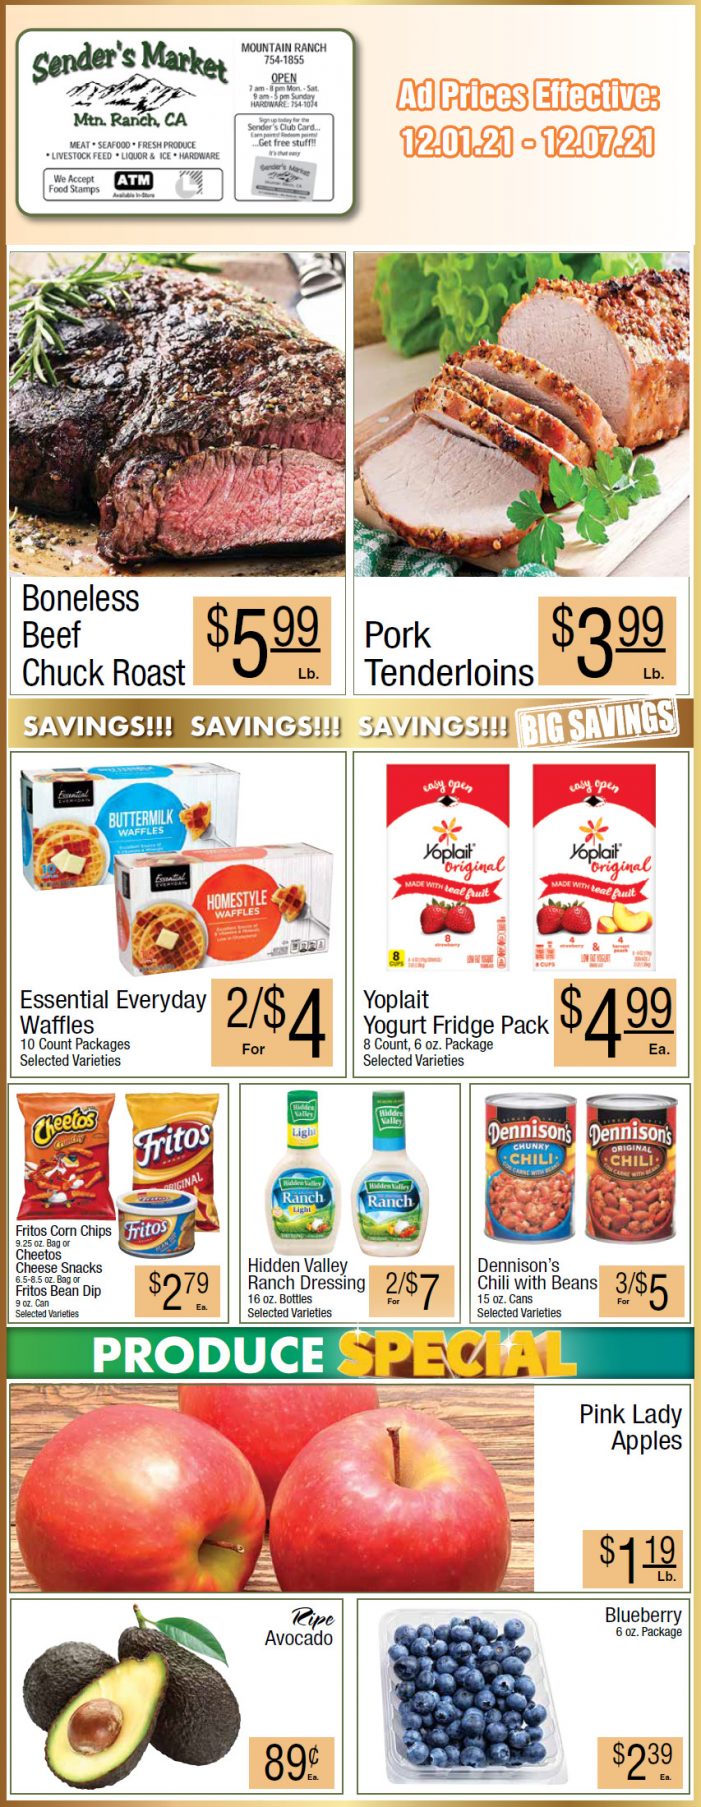 Sender’s Market’s Weekly Ad & Grocery Specials Through December 7th! Shop Local & Save!